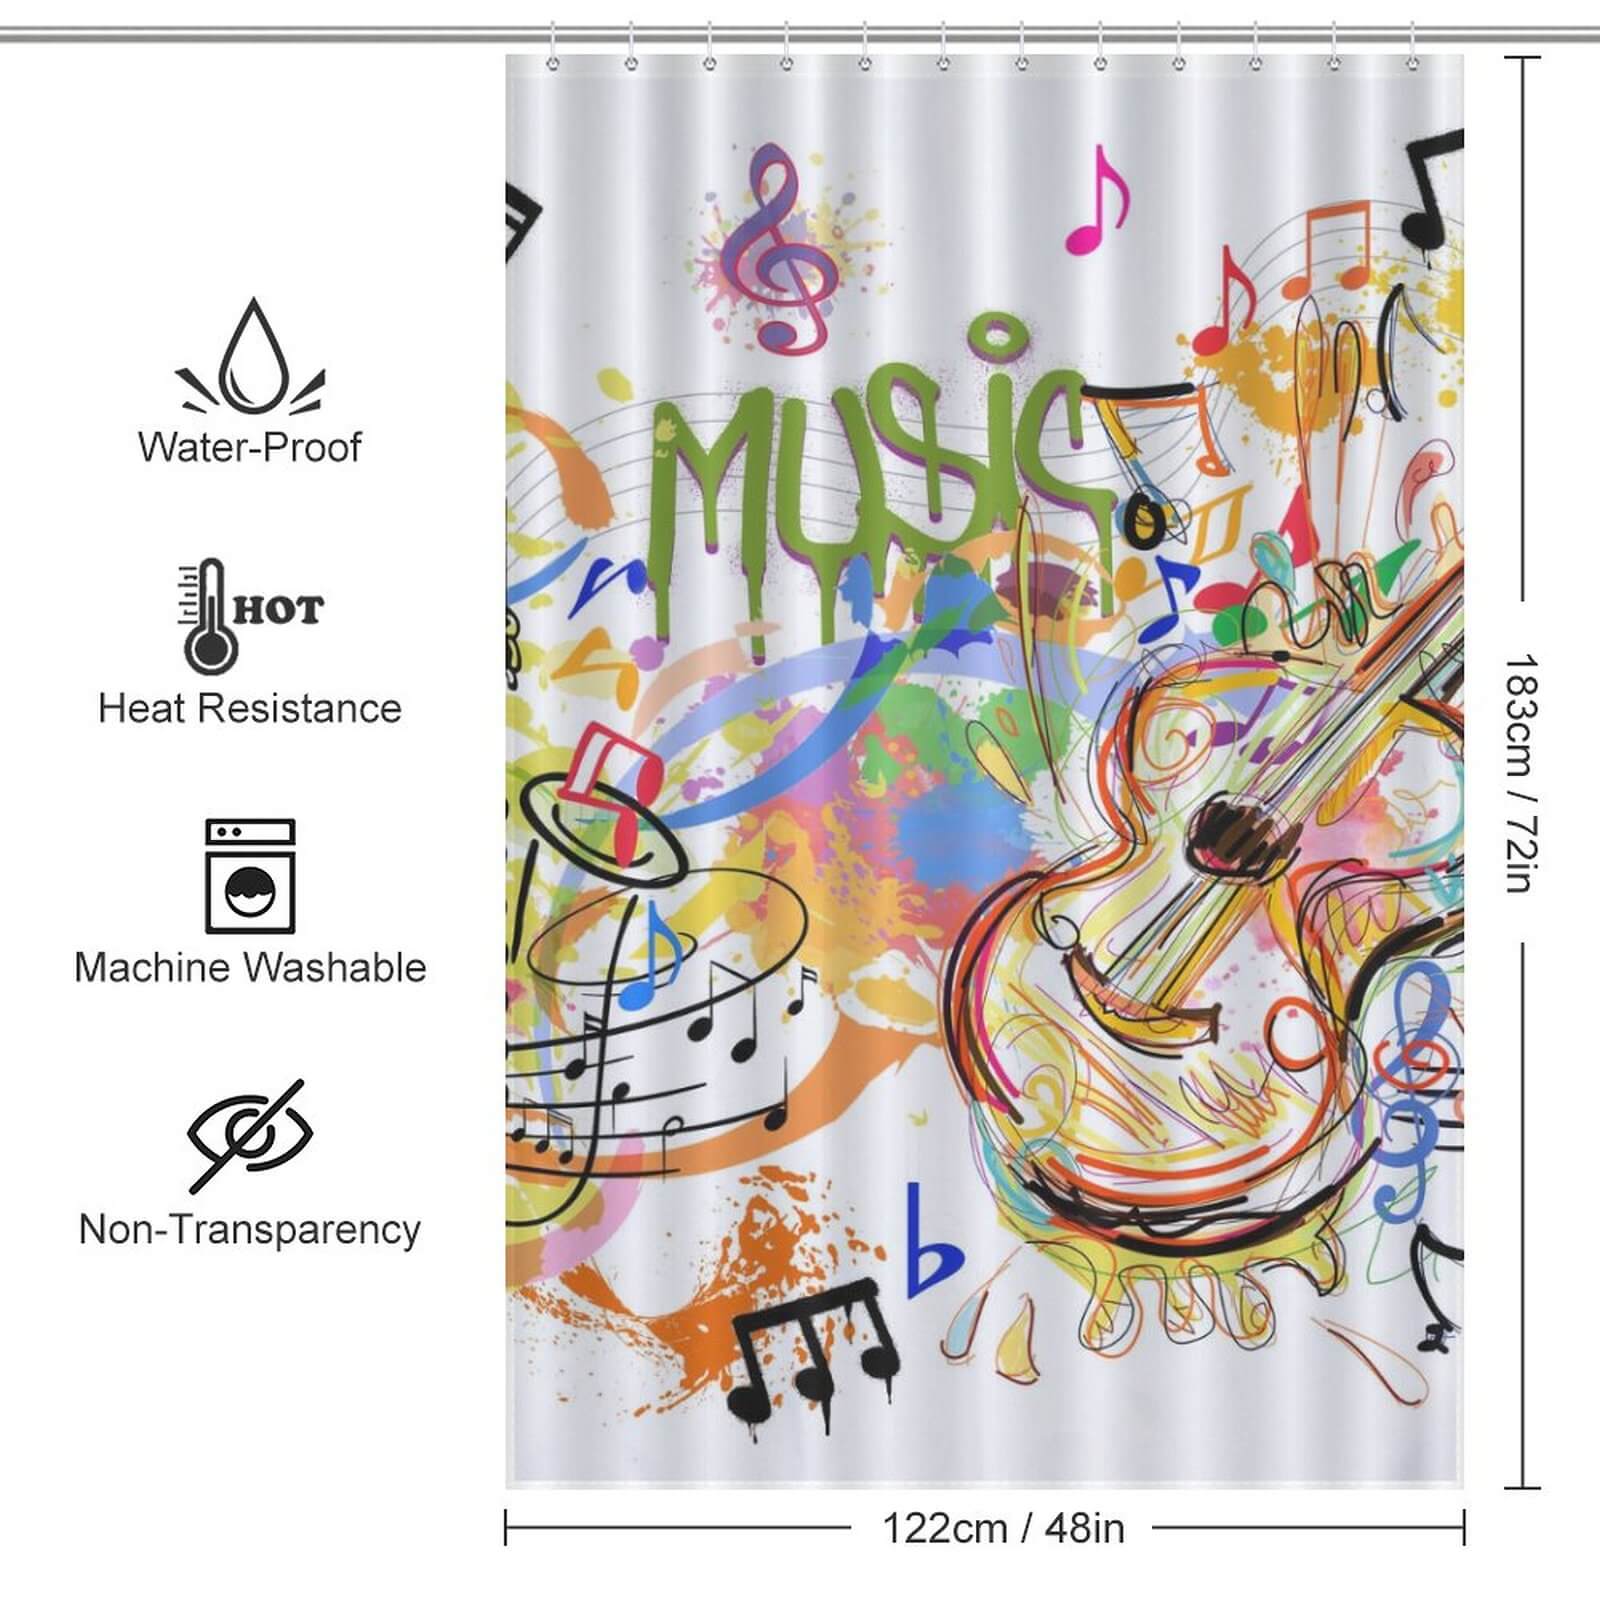 A colorful Cotton Cat shower curtain with graffiti-inspired music notes and guitar design: Graffiti Music Shower Curtain-Cottoncat.